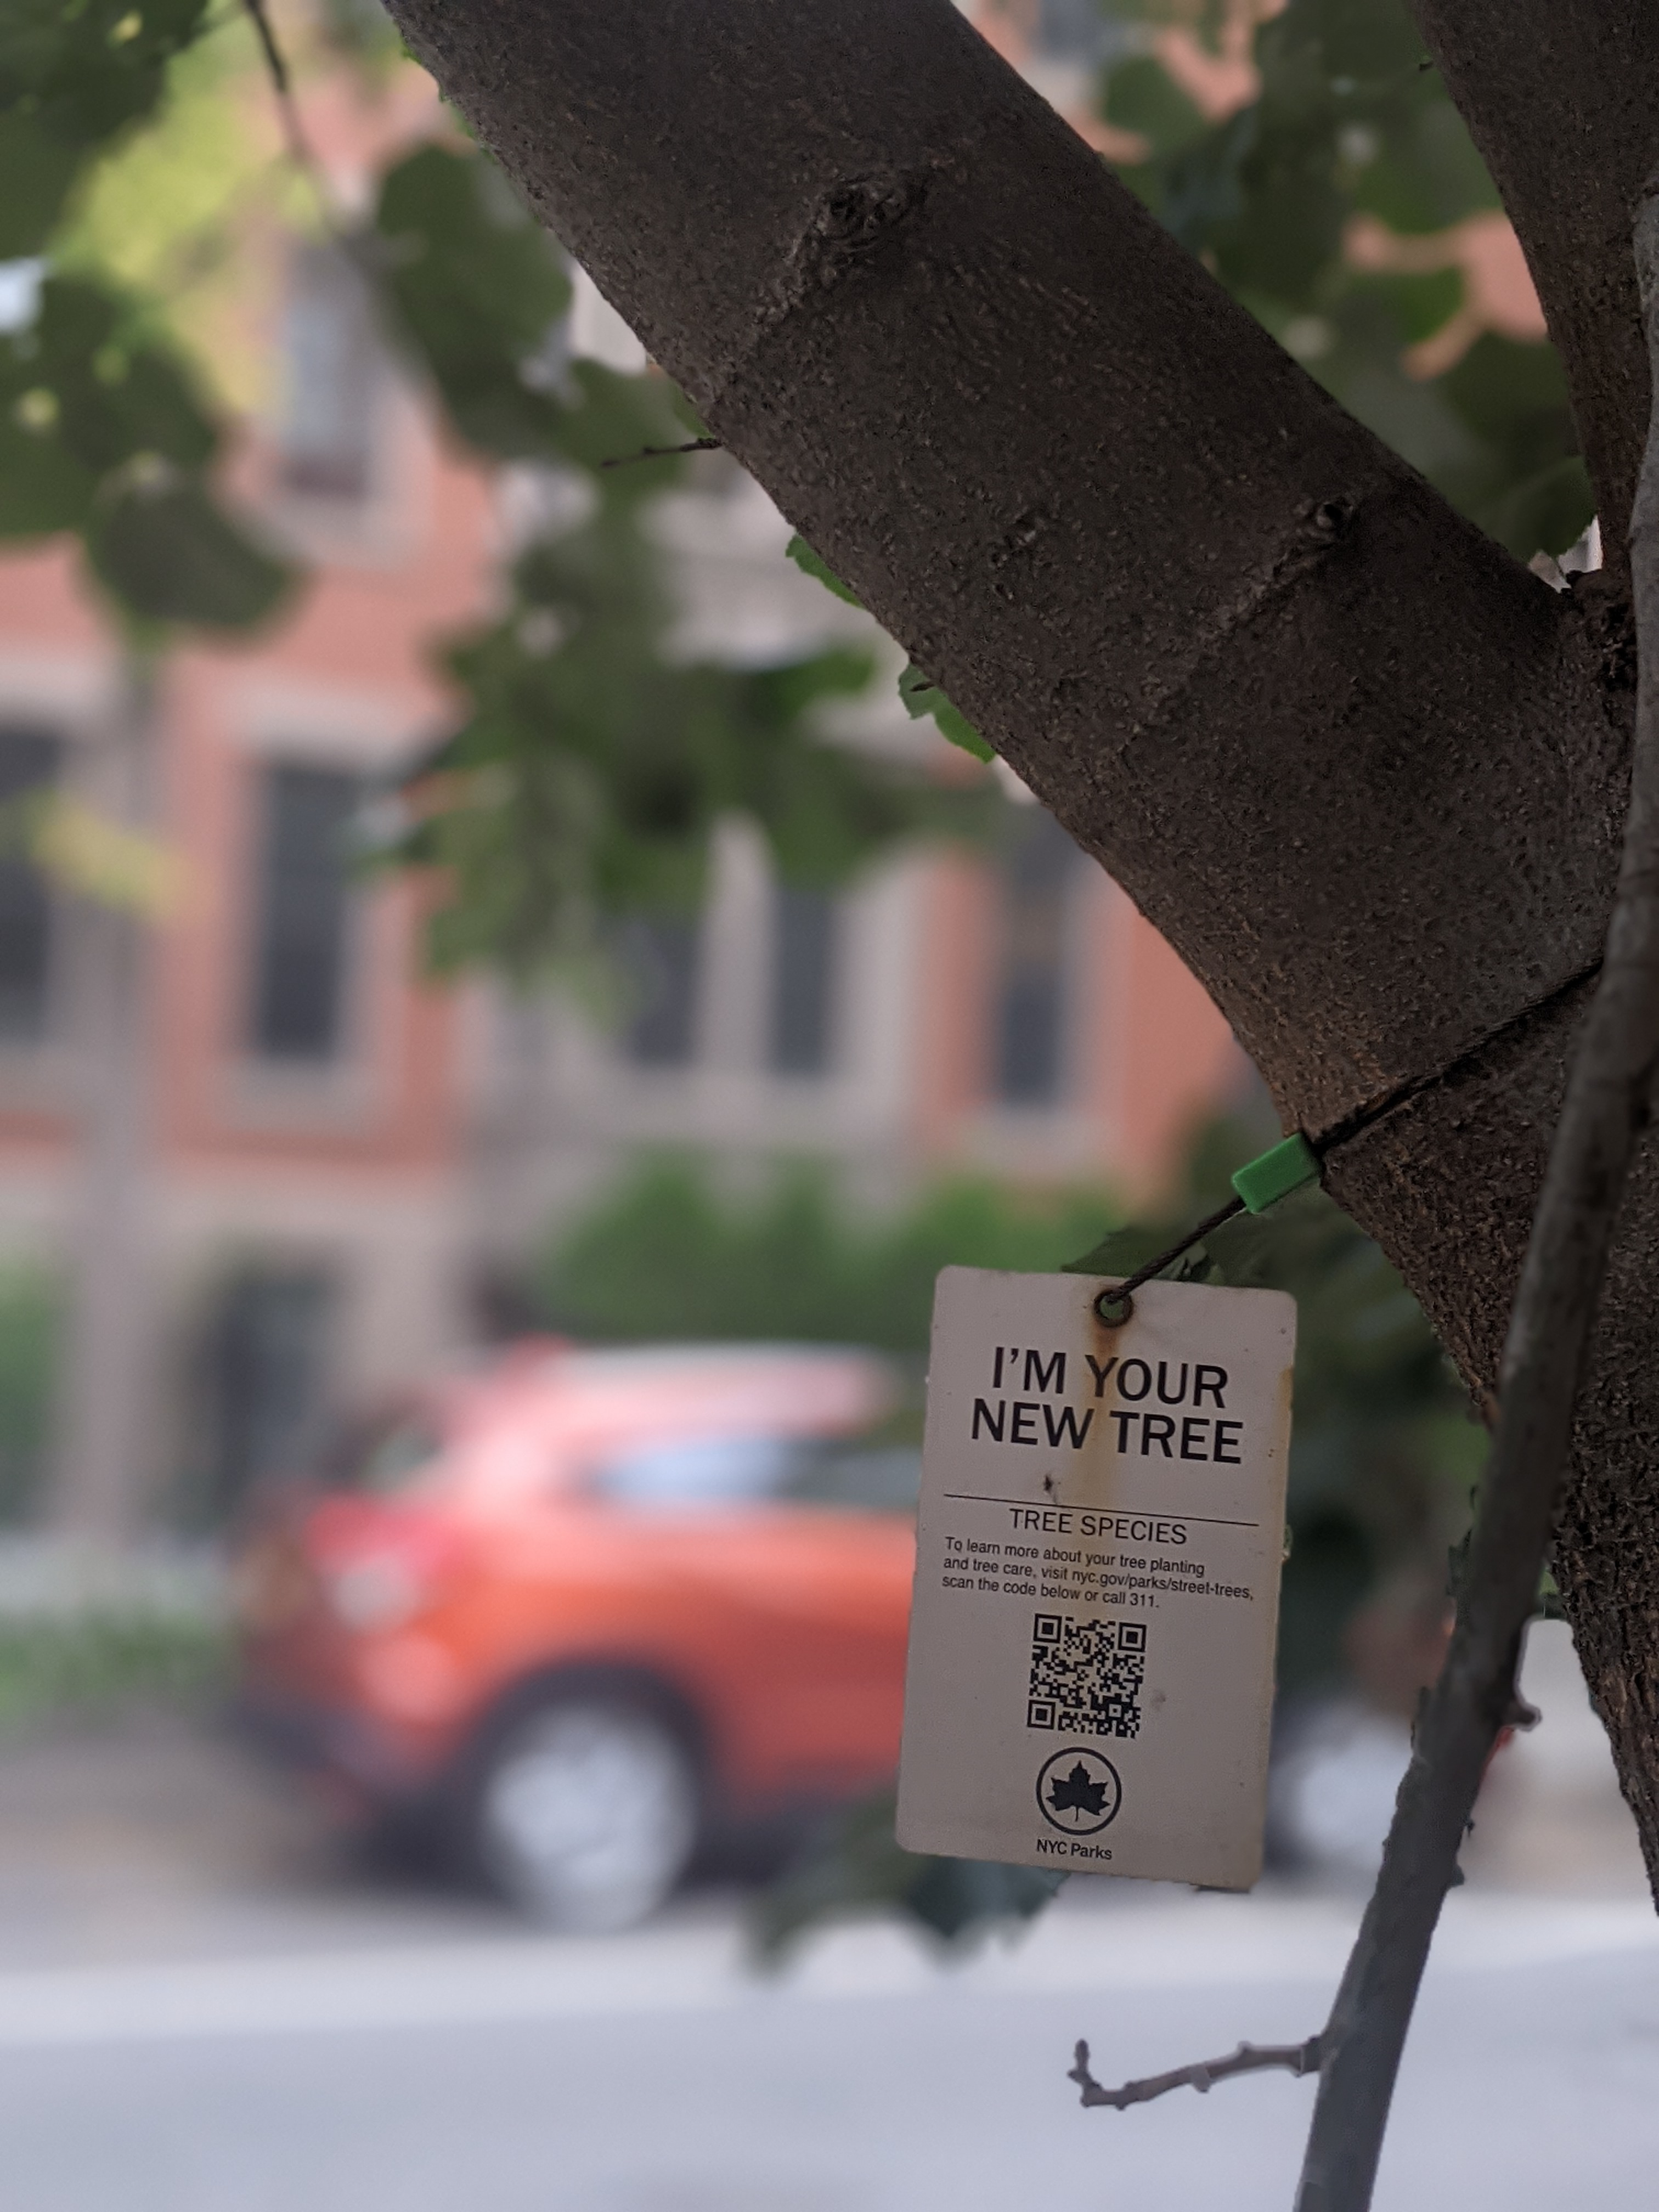 A tag reading "I'M YOUR NEW TREE", which contains information about the tree it's attached to.